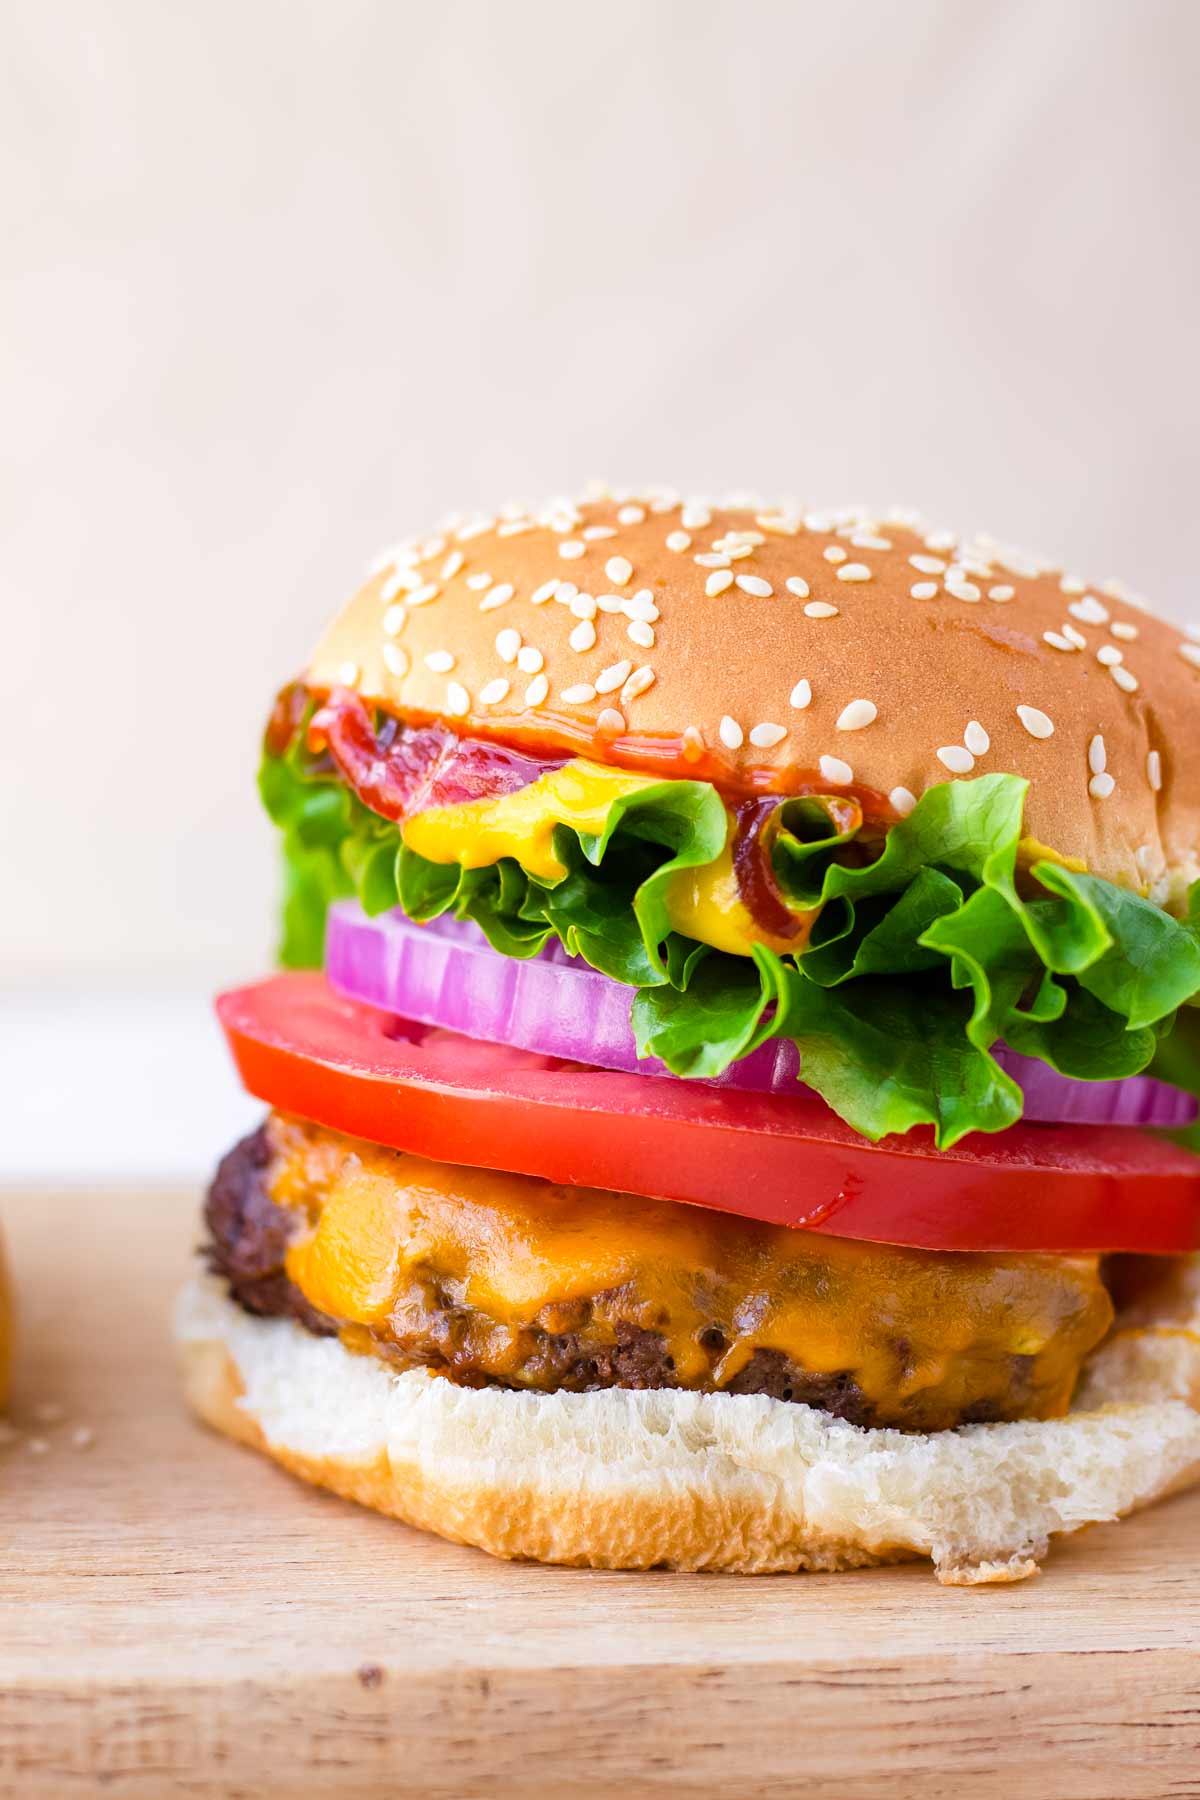 a classic American beef burger with lettuce, tomato, onion on a sesame bun